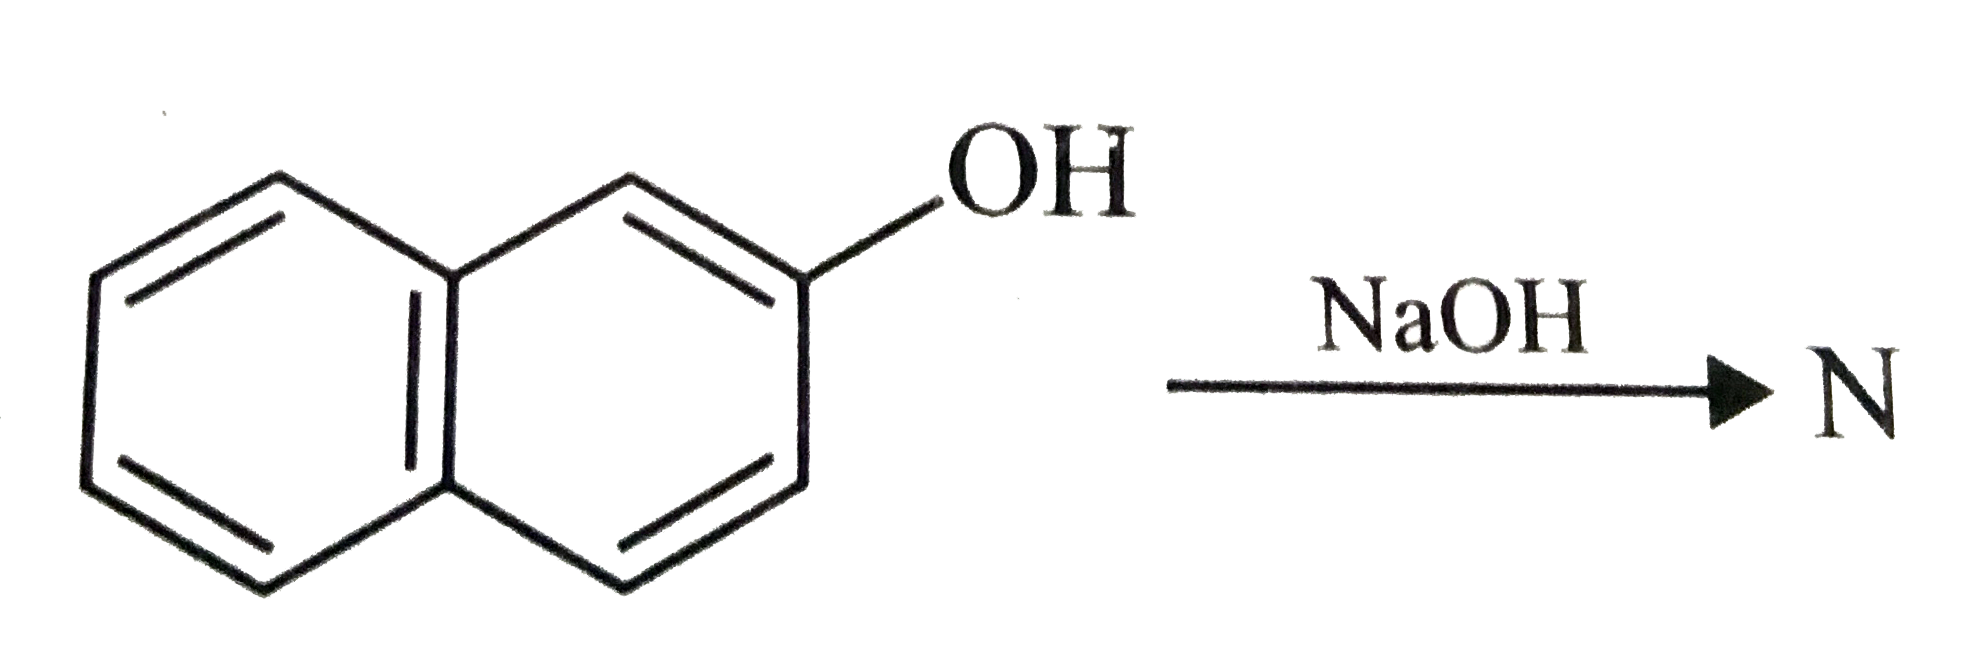 The number of resonance structures of N is